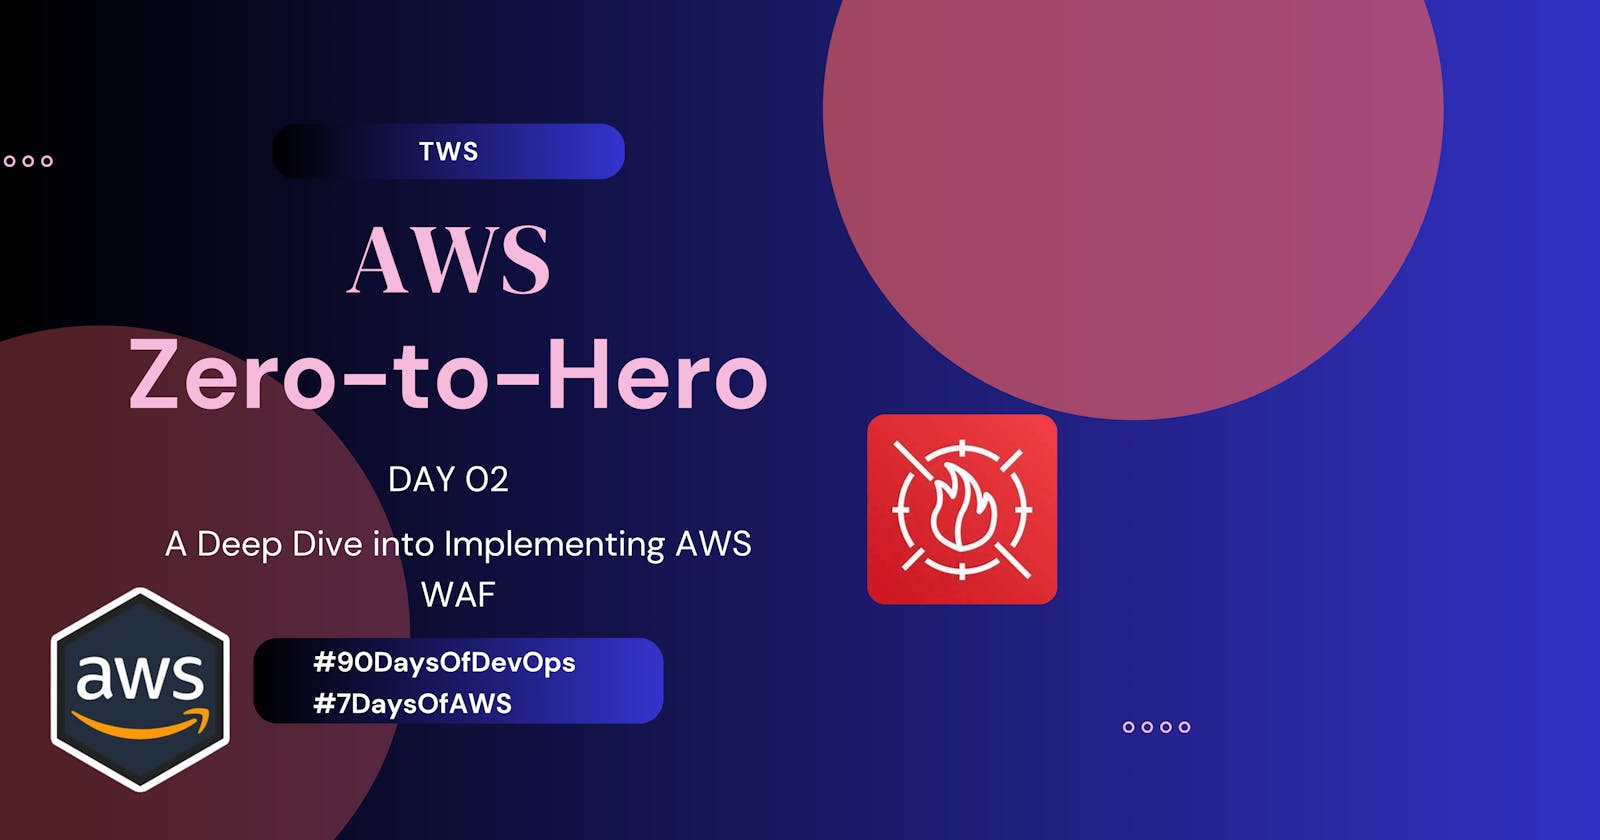 Day 2: A Deep Dive into Implementing AWS WAF for Unrivaled Web Application Security, Auto-Scaling and load balancing: